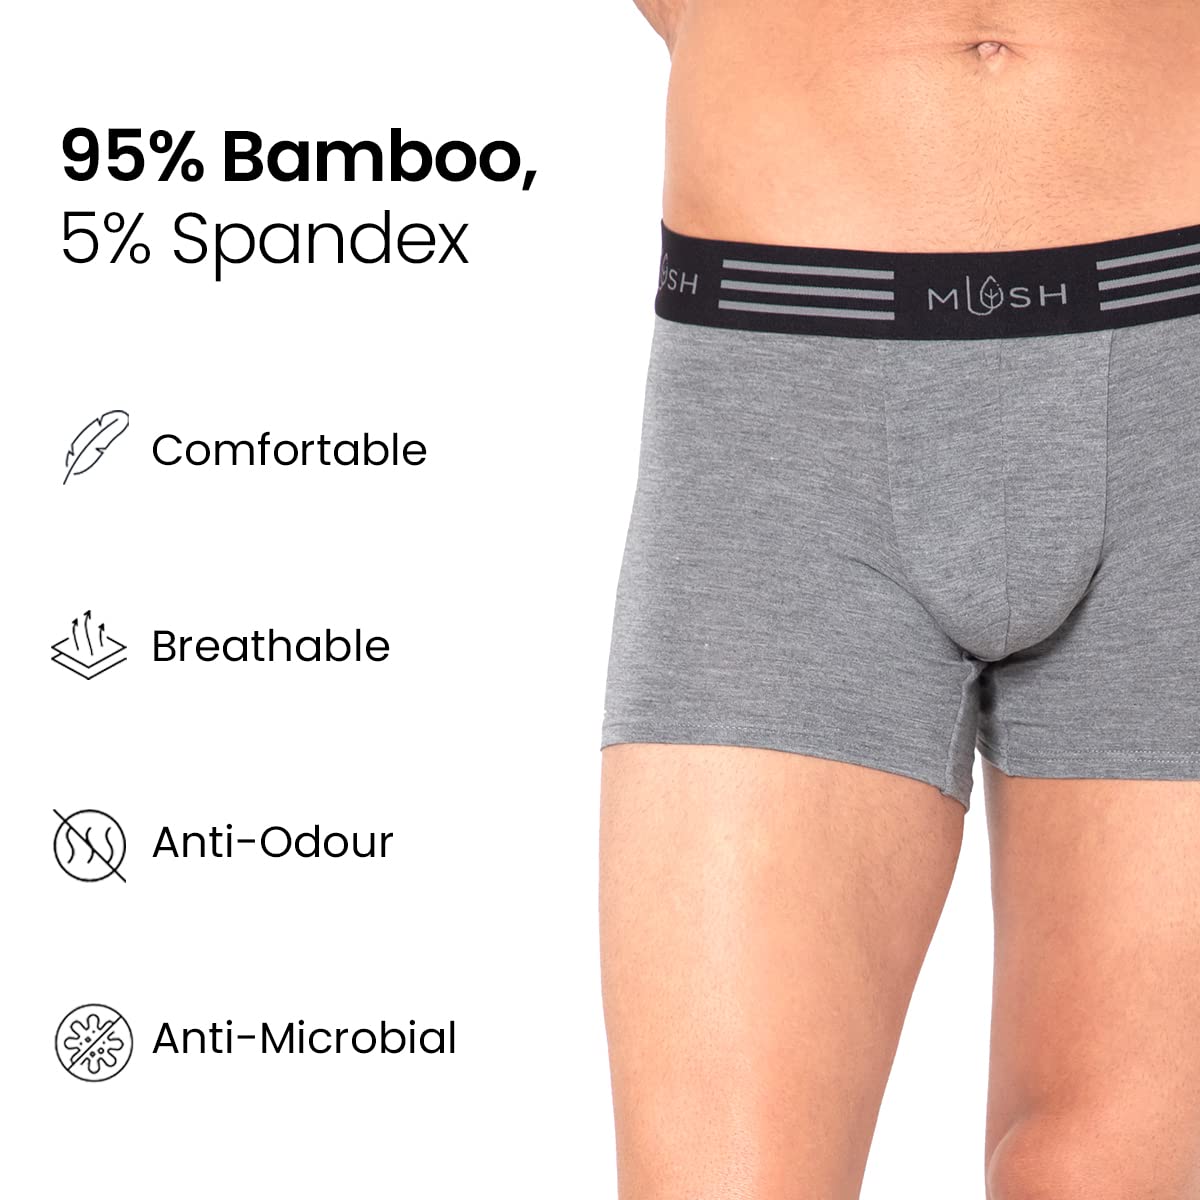 Mush Ultra Soft, Breathable, Feather Light Men's Bamboo Trunk || Naturally Anti-Odor and Anti-Microbial Bamboo Innerwear (M, Grey)